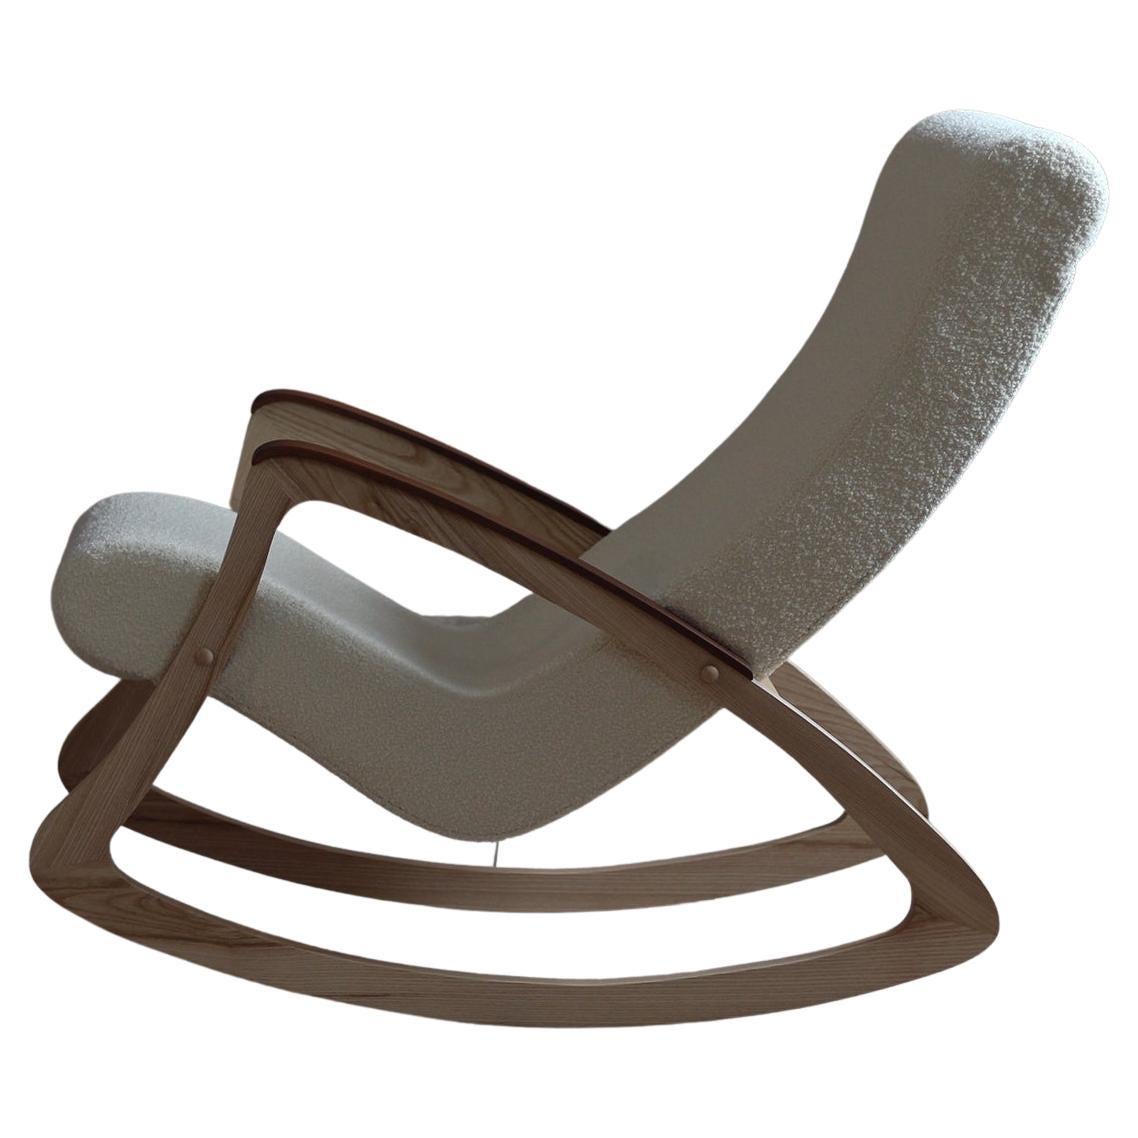 Rare Vintage Rocking Chair, Czechoslovakia, 1950s, Reupholstered in French Boucle